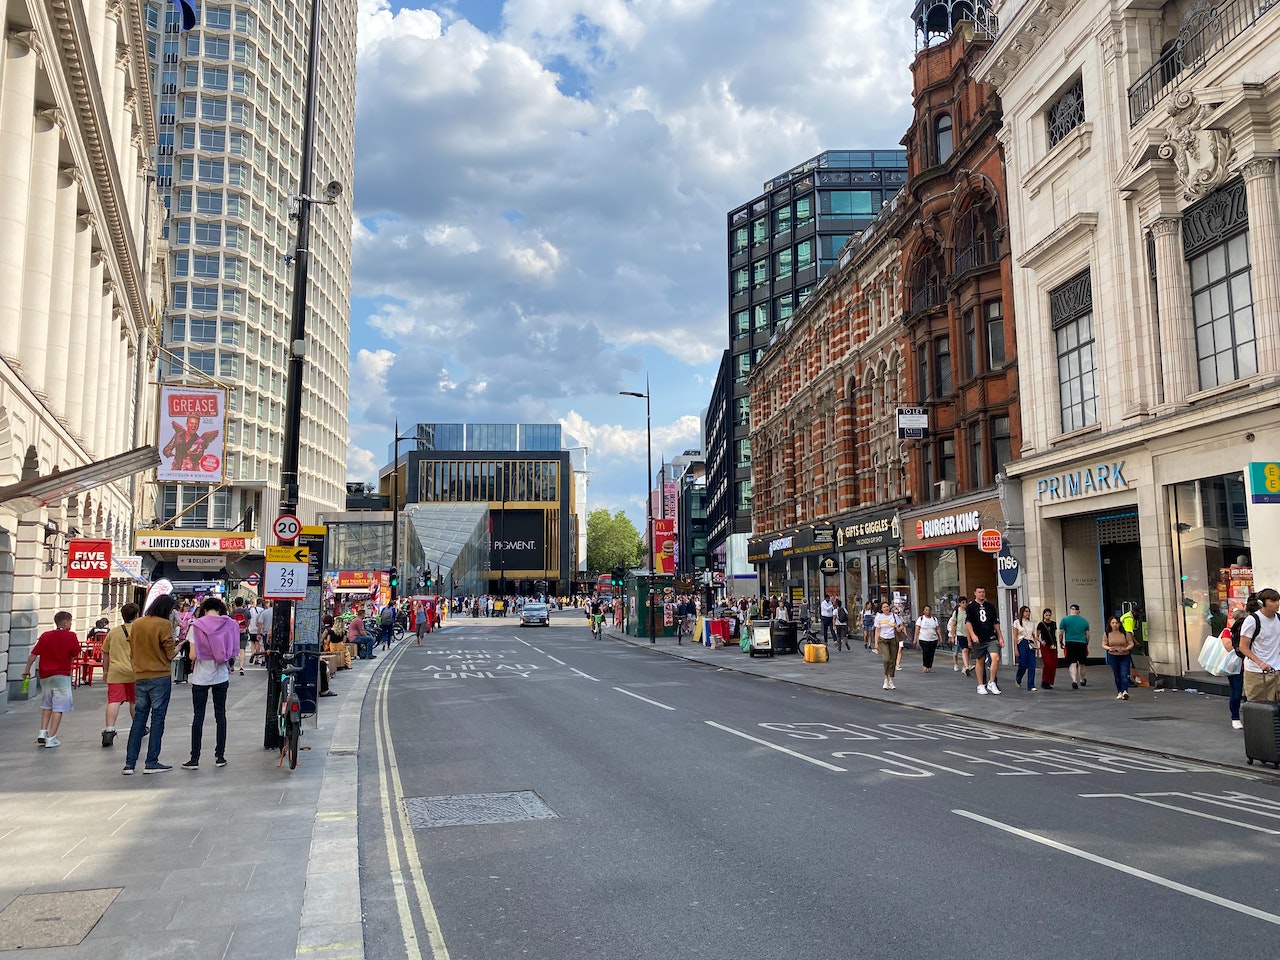 Revitalizing Oxford Street: A Blueprint for a Brighter Future